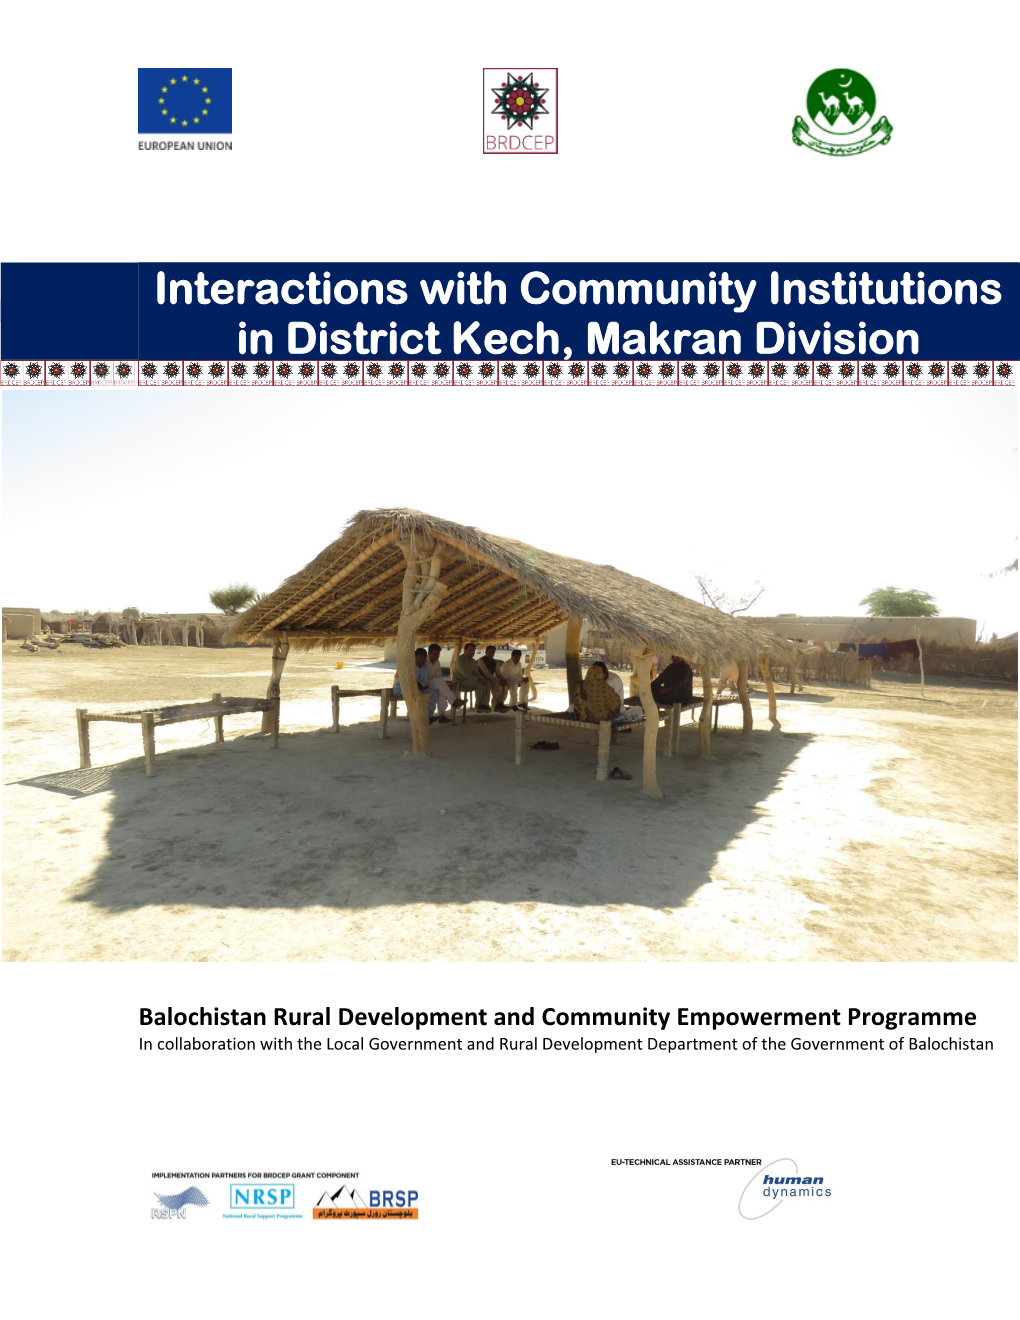 Interactions with Community Institutions in District Kech, Makran